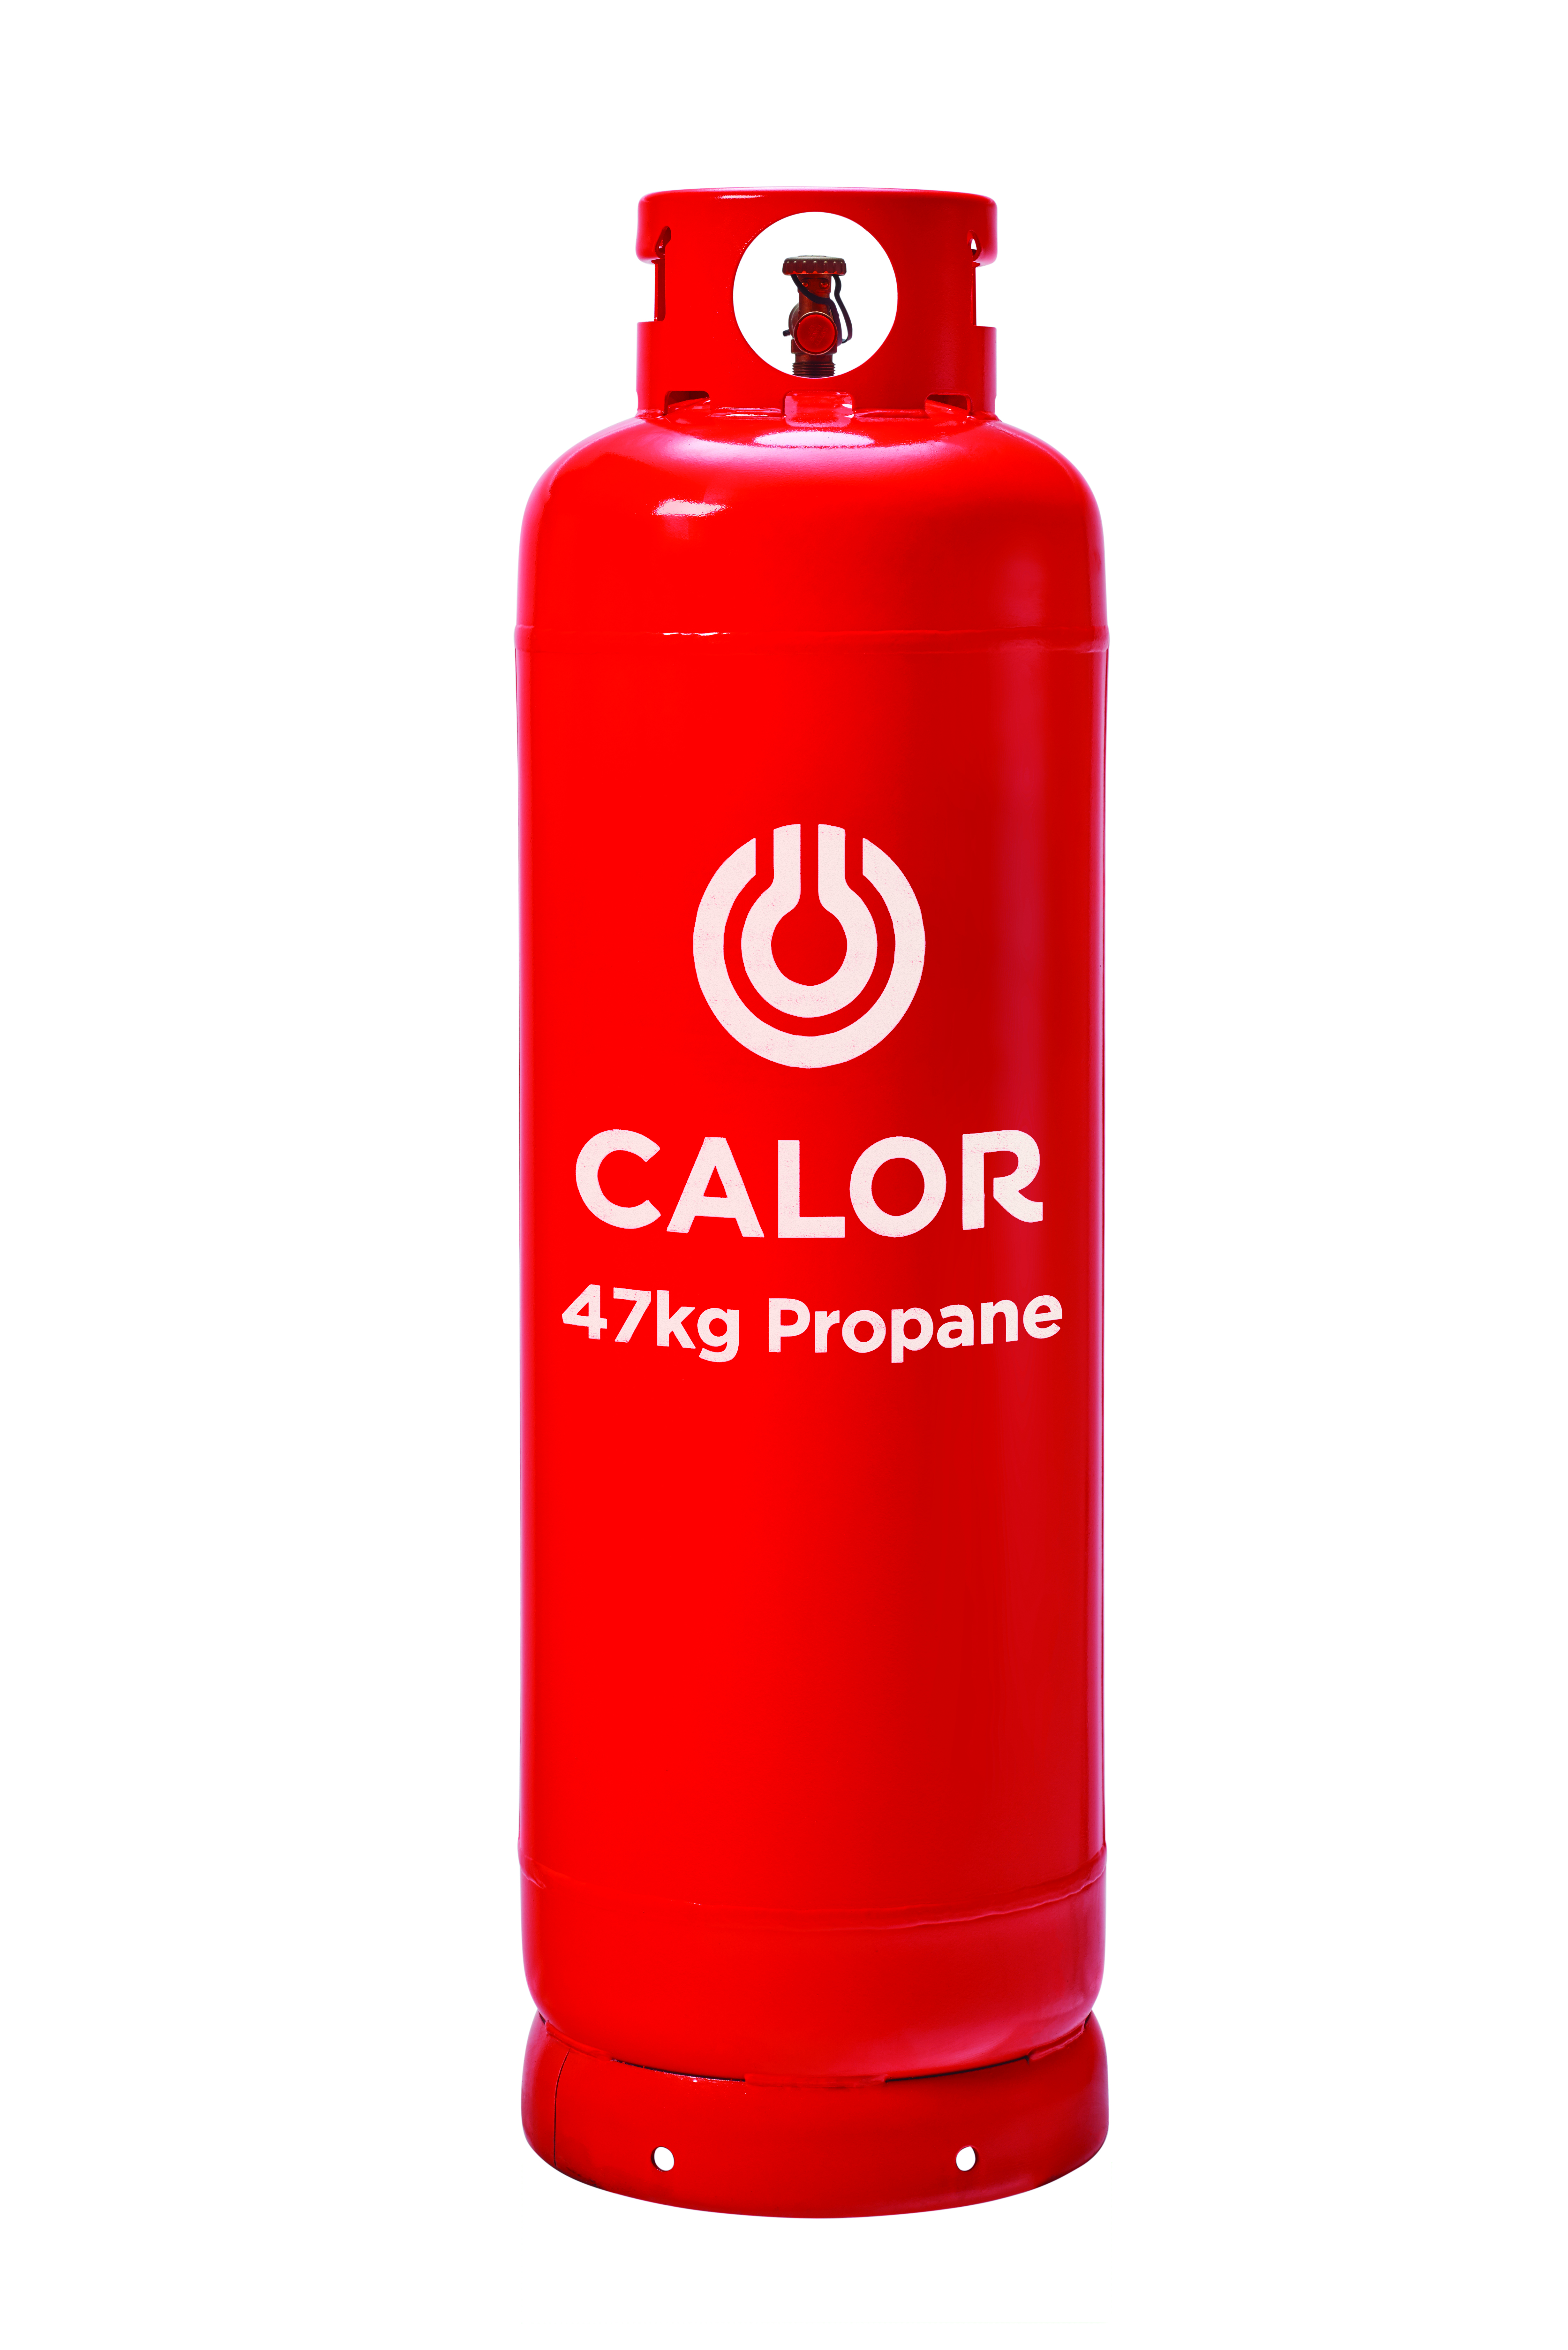 47kg Propane Calor Gas Bottle delivery for home heating